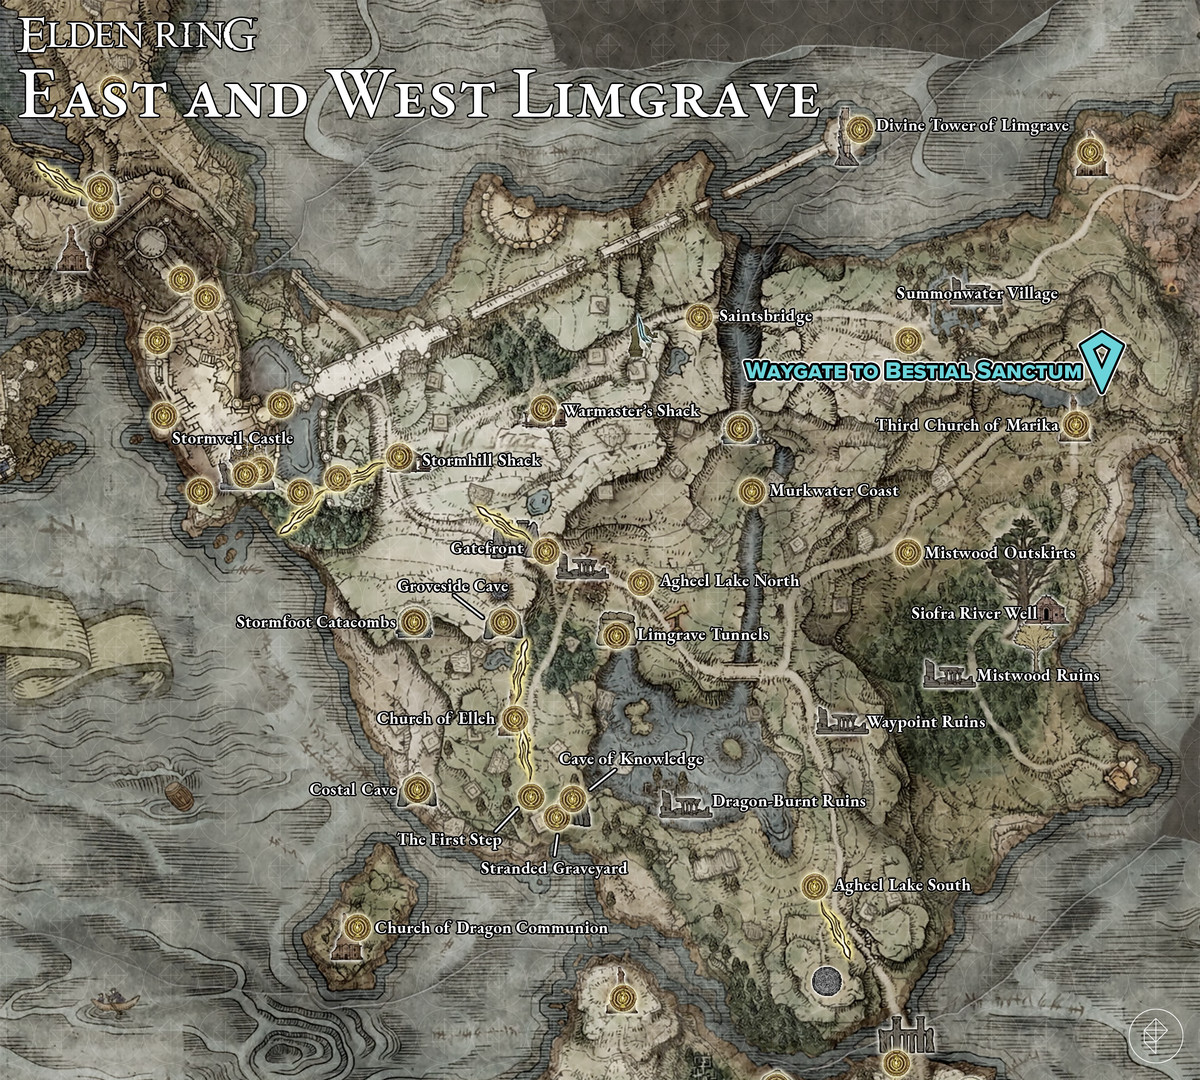 Map of Limgrave's Old Ring with a pin showing the location of the entrance gate to the Bestial Sanctum.